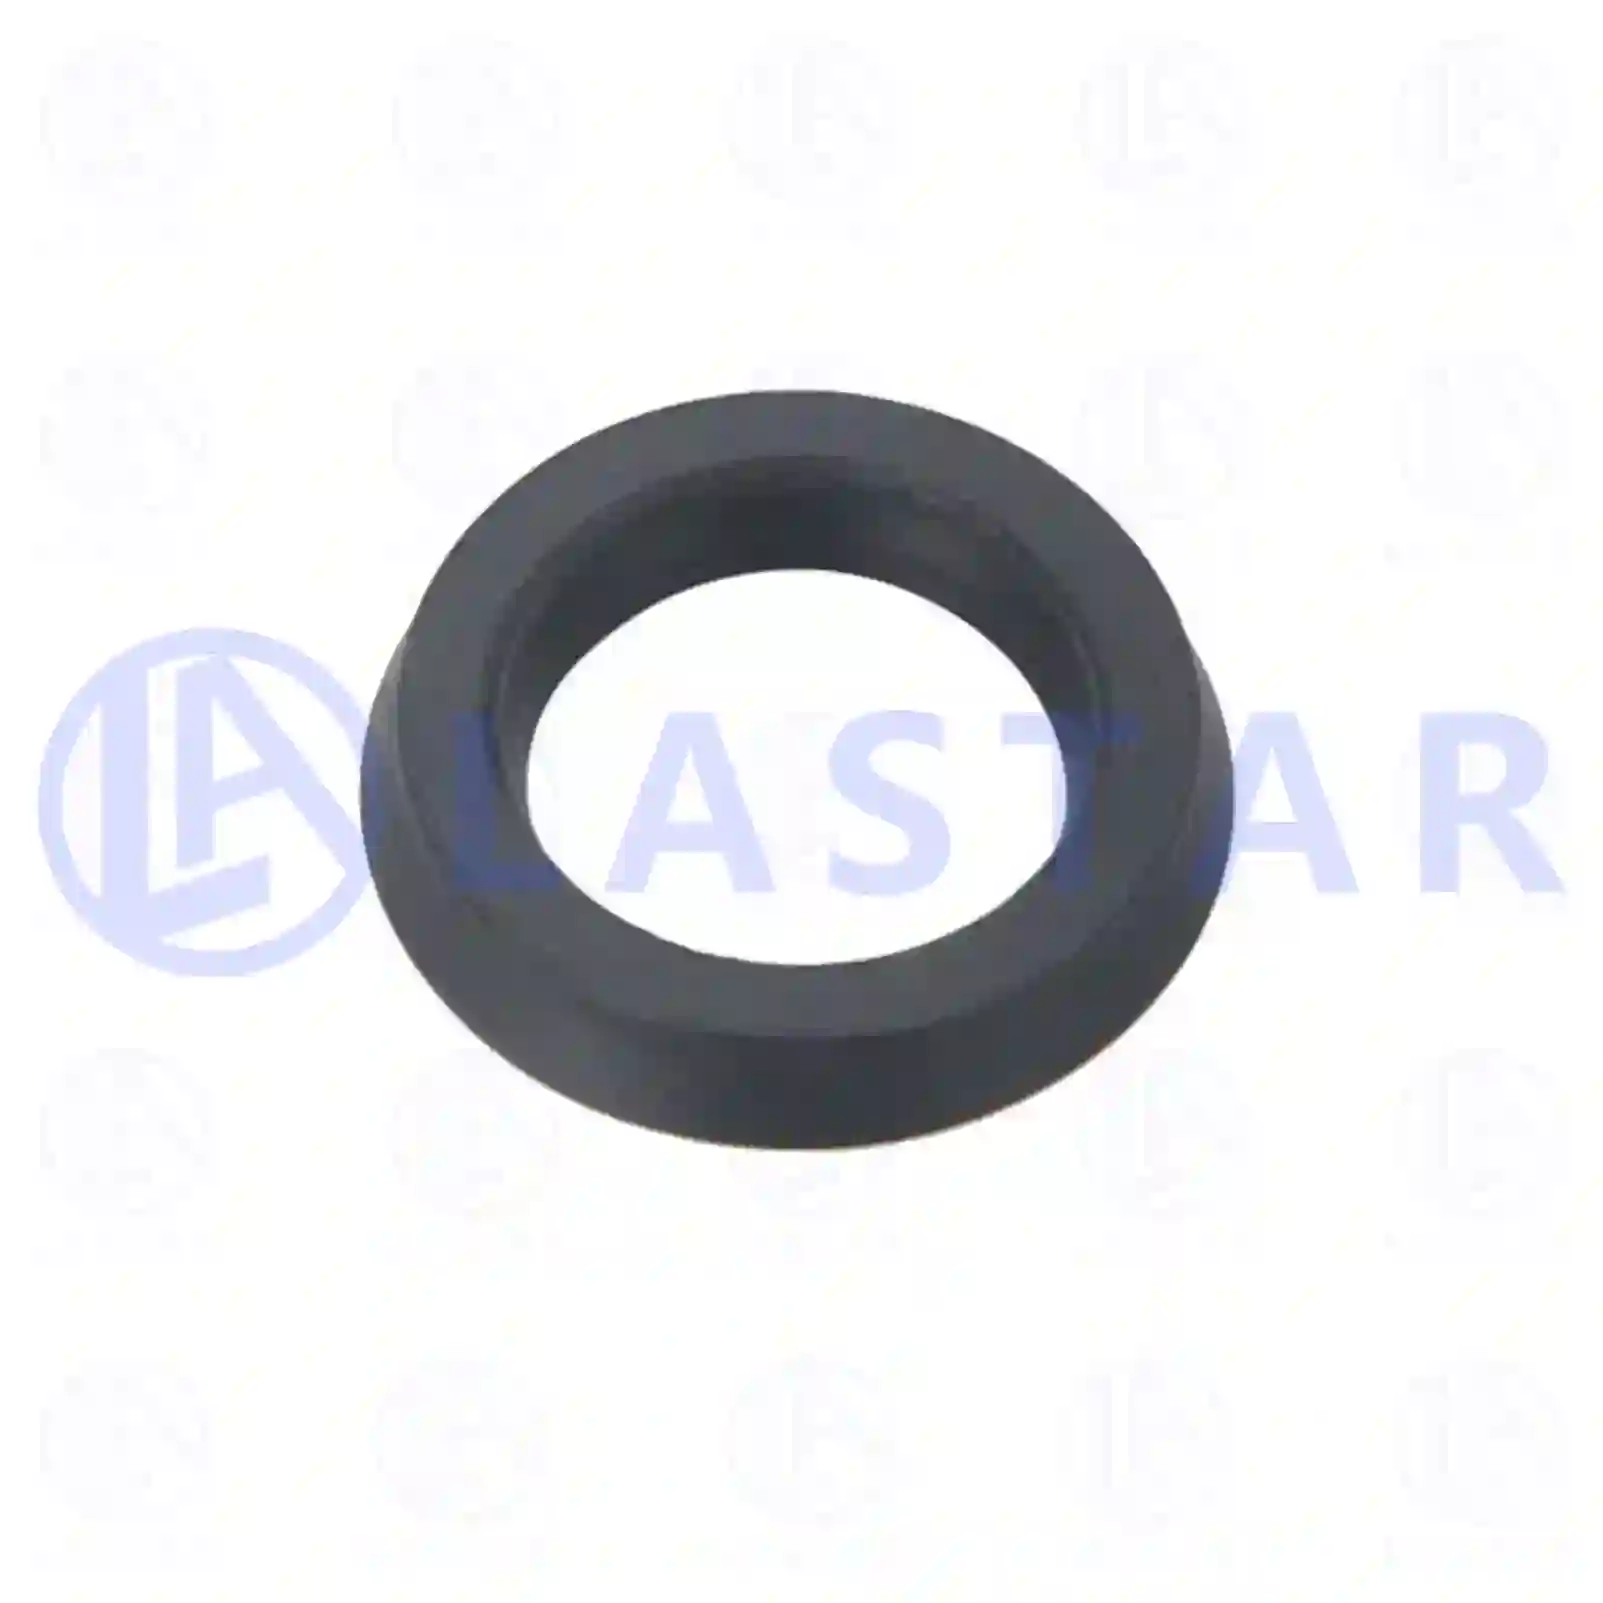  Seal ring || Lastar Spare Part | Truck Spare Parts, Auotomotive Spare Parts